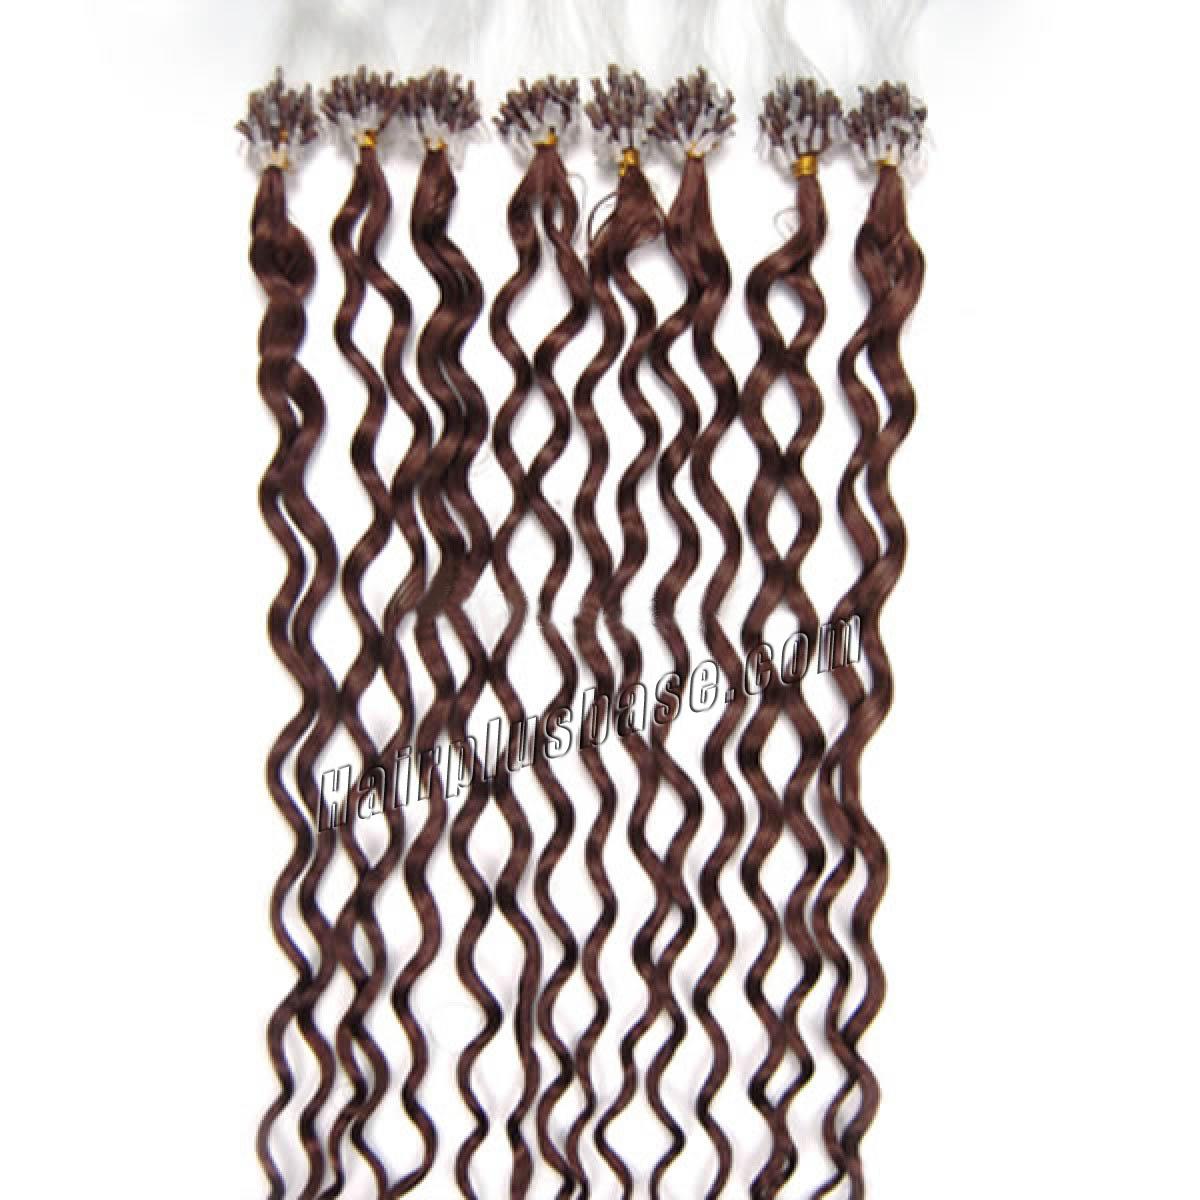 Perky Looking 18 Inch 33 Rich Copper Red Curly Micro Loop Hair